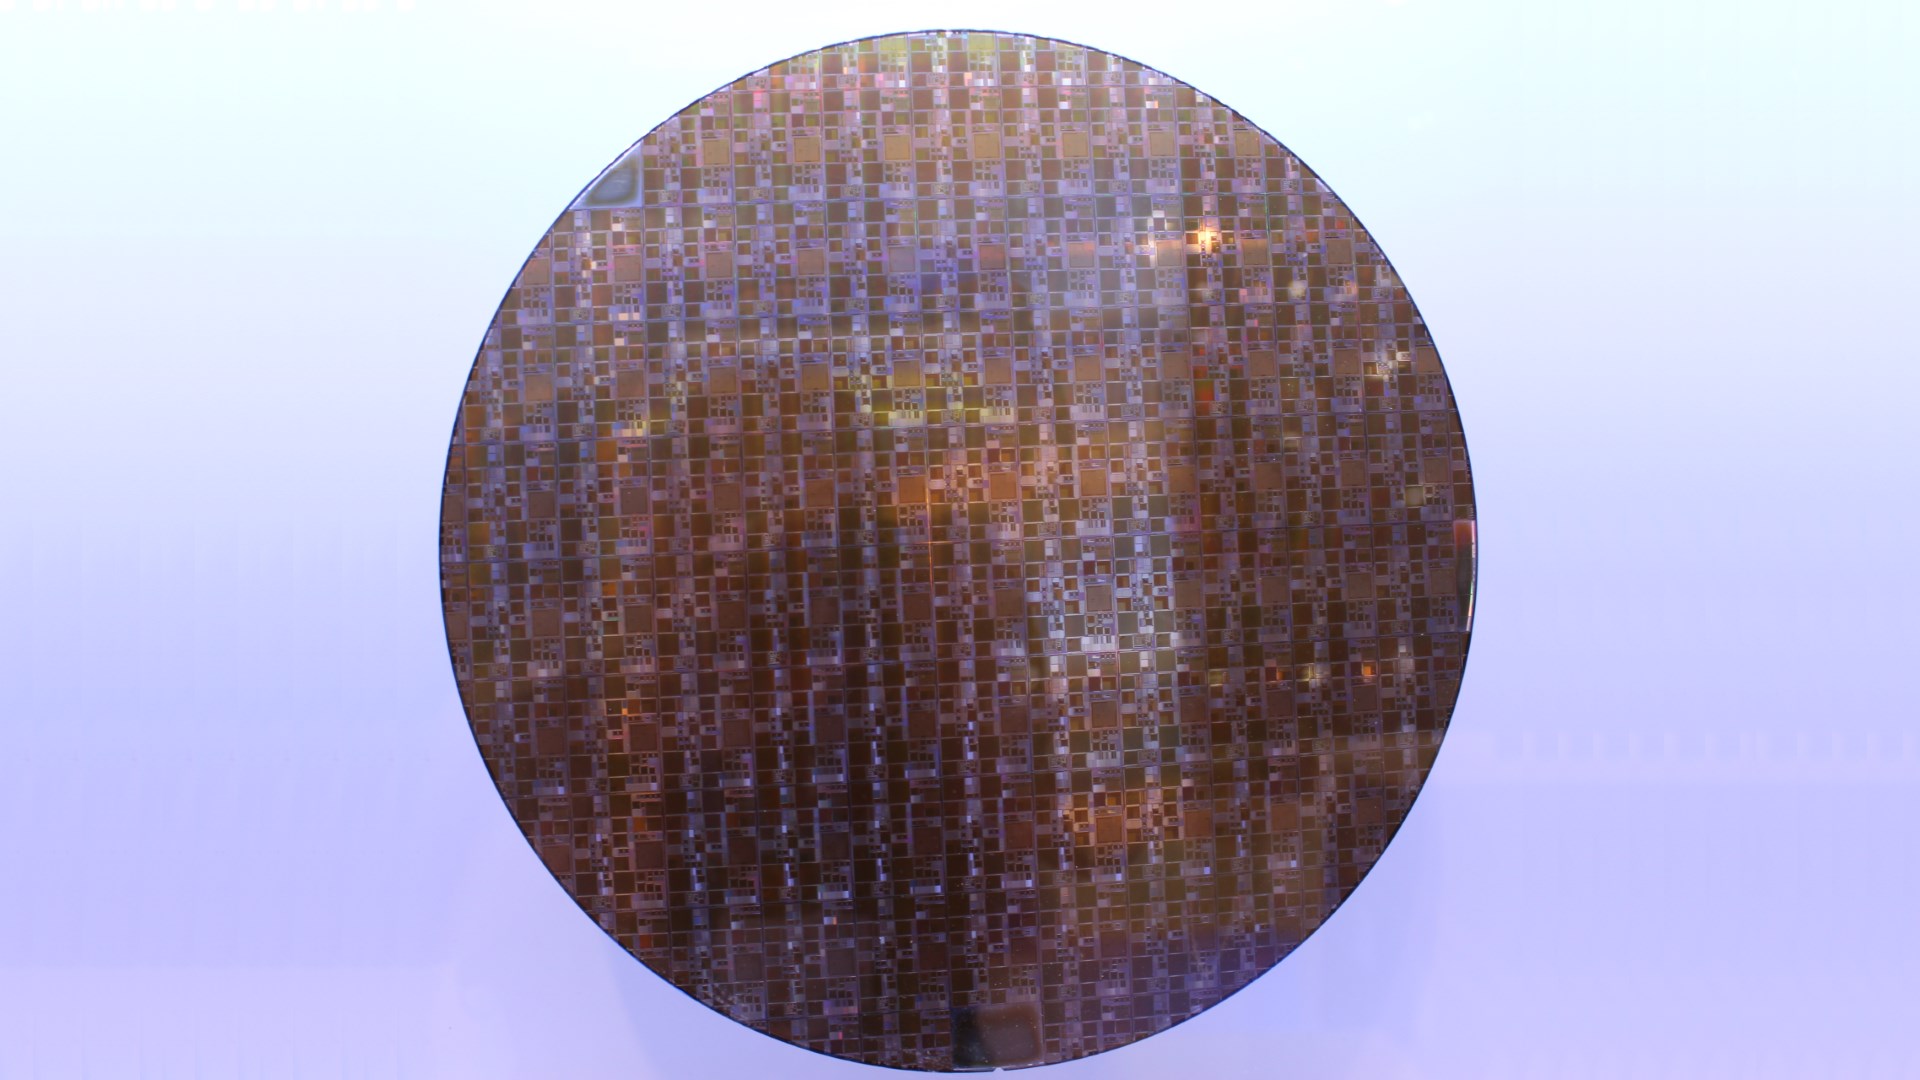 A circular silicon wafer etched with various circuits and chips